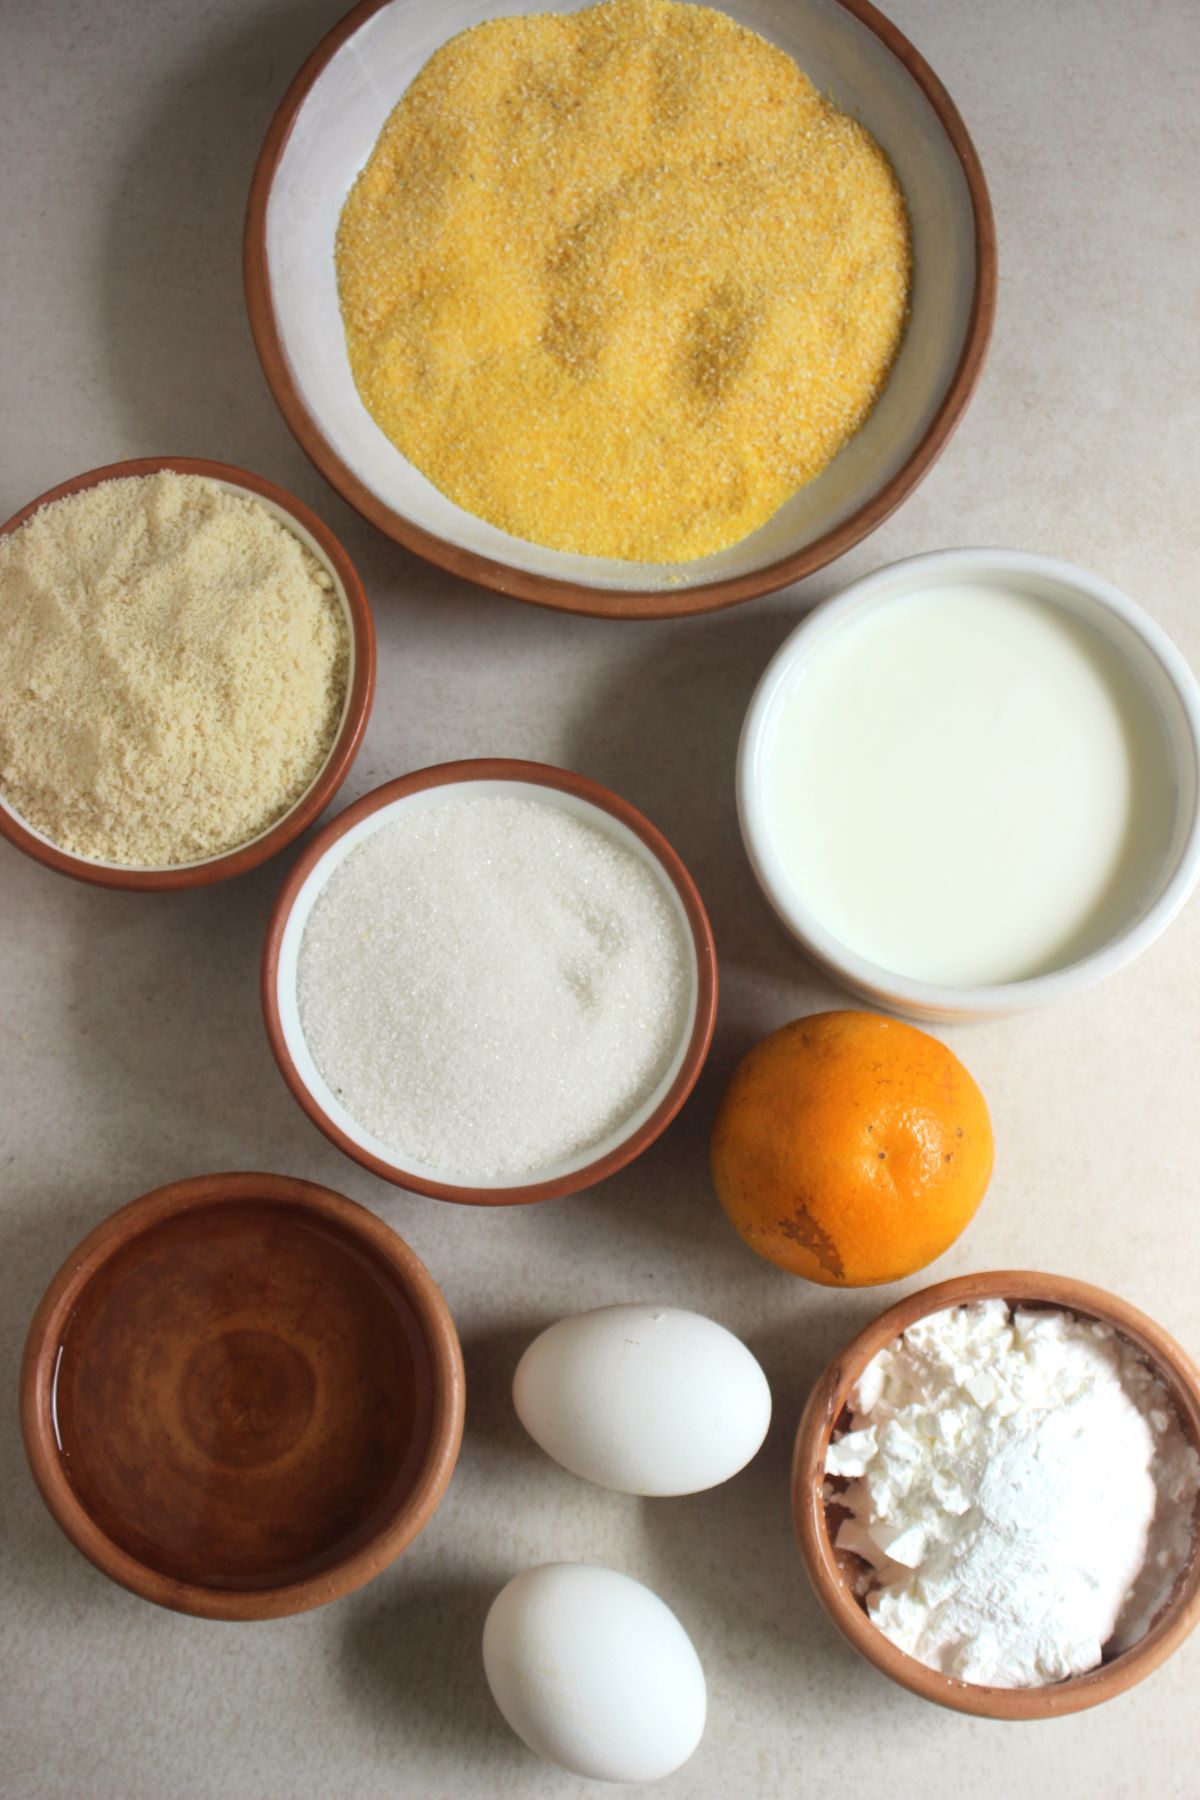 Orange cake ingredients on a white surface seen from above.